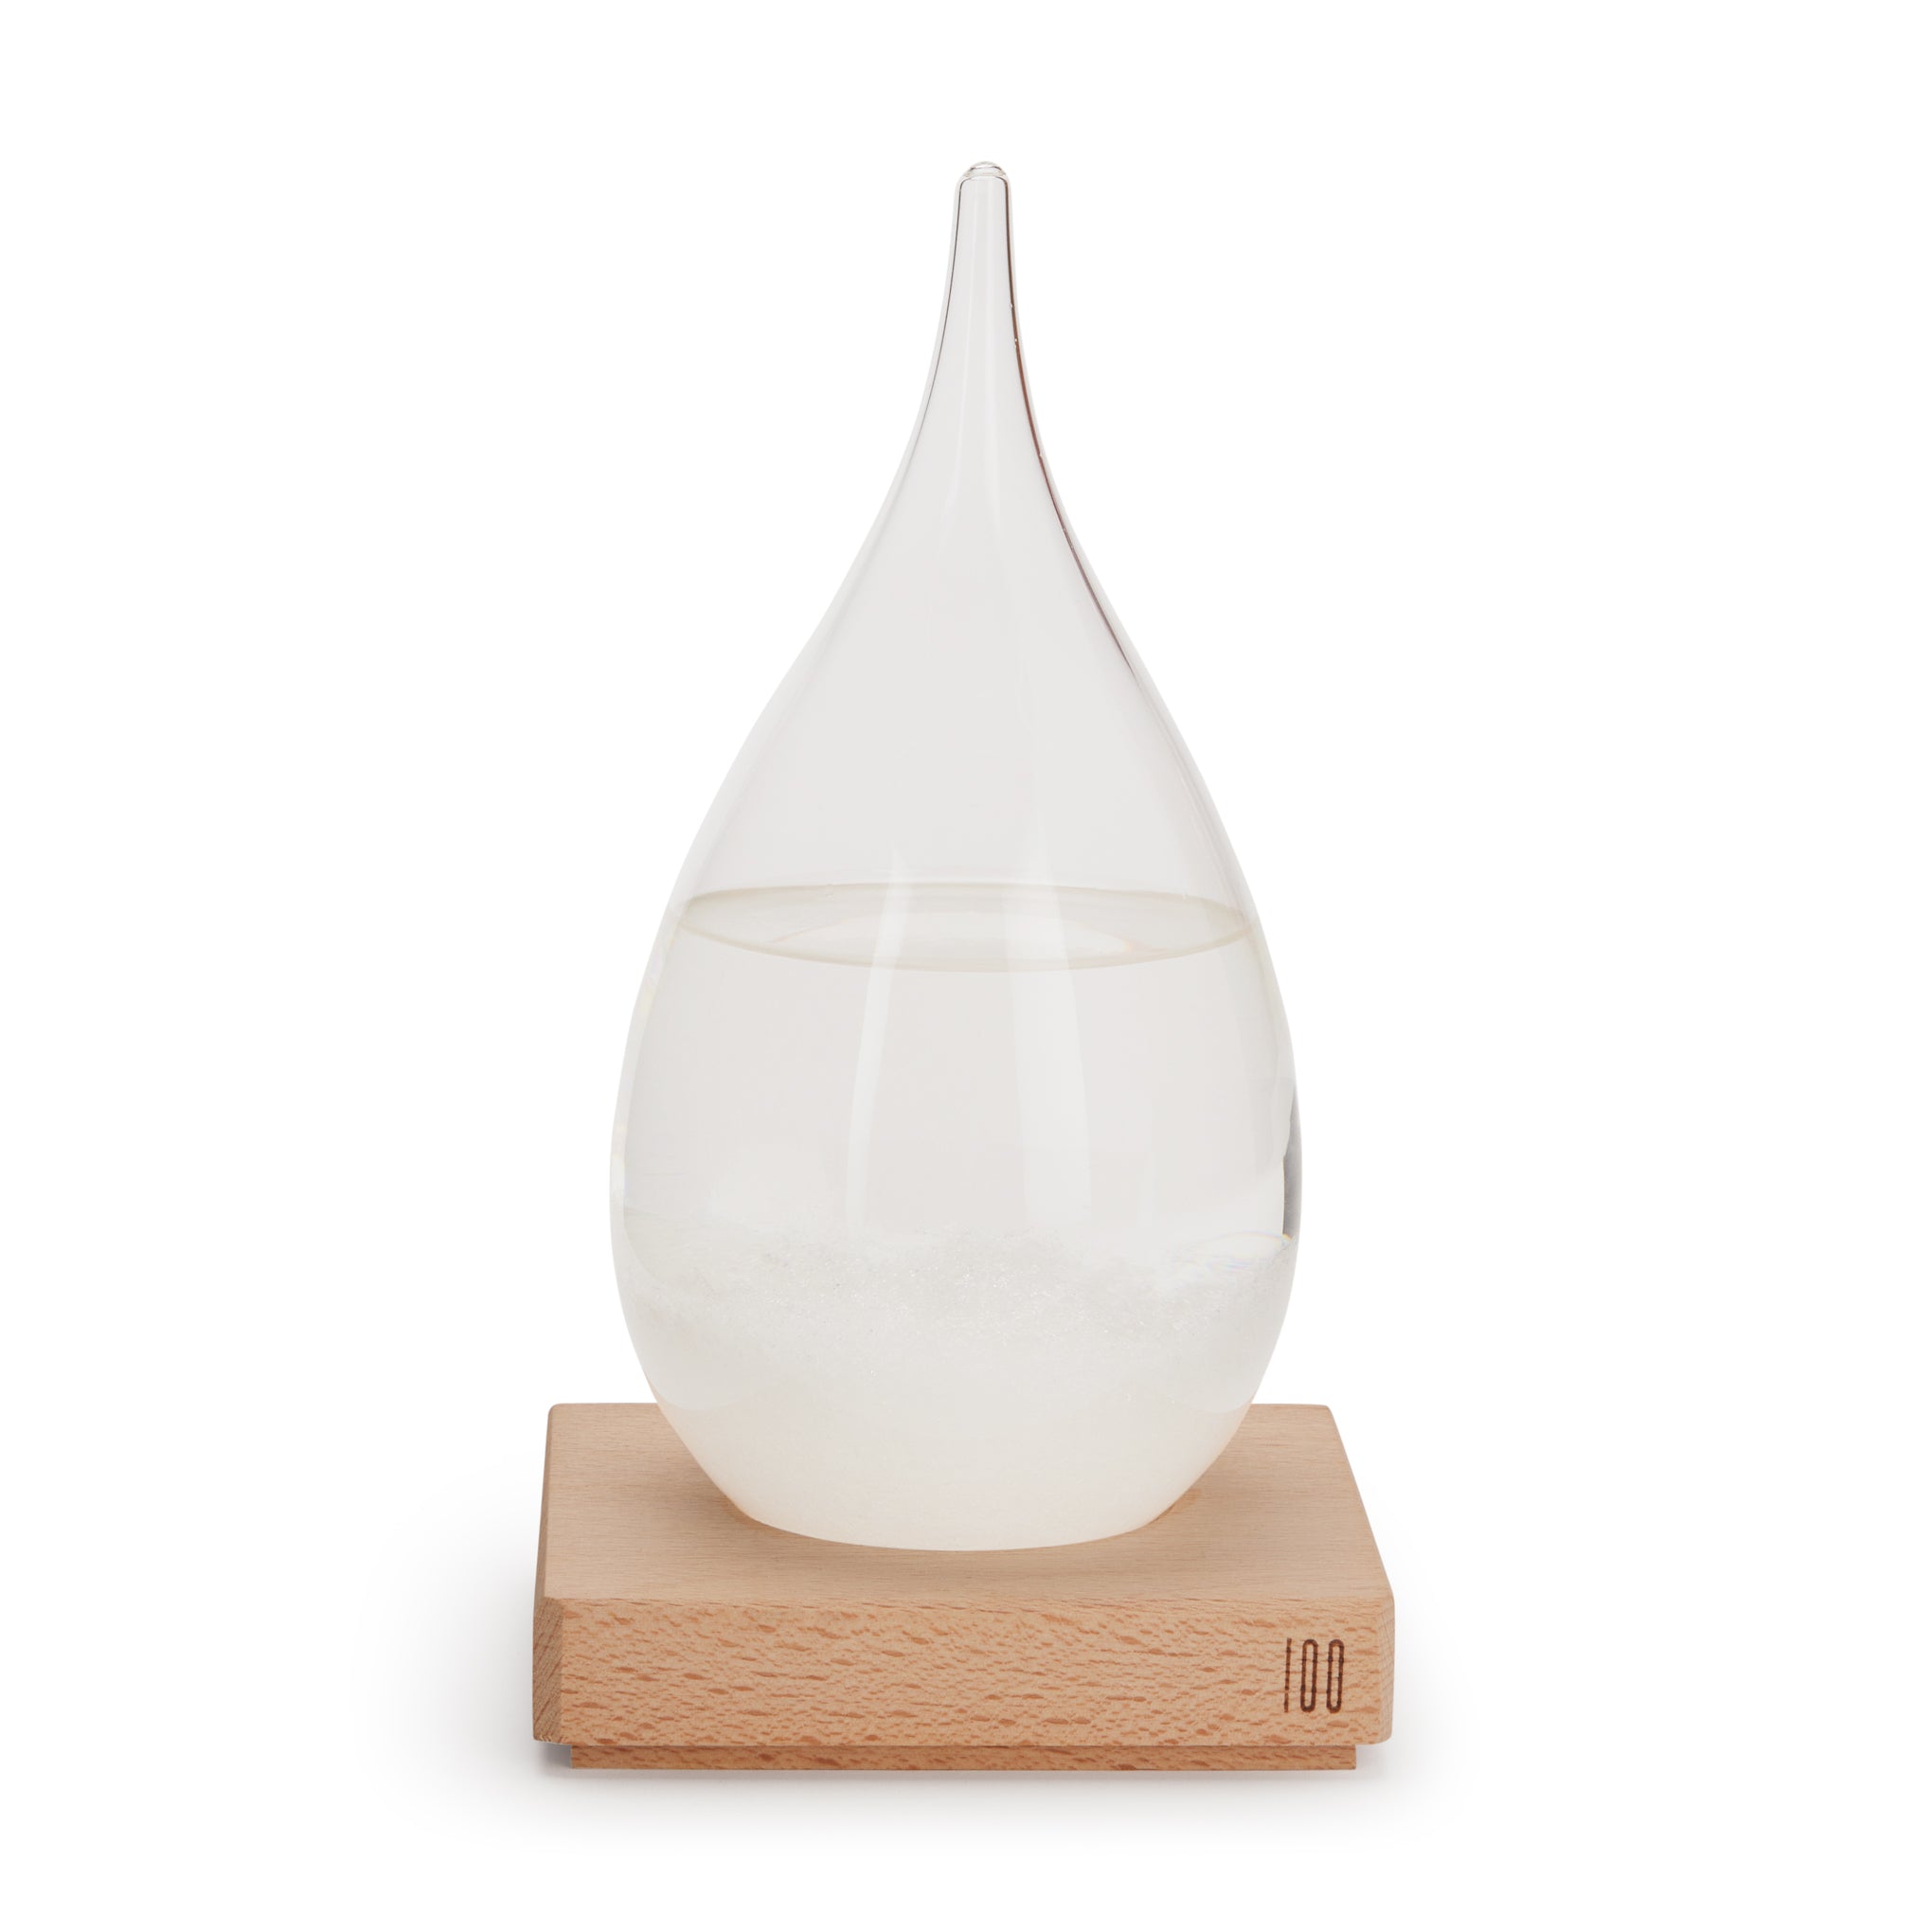 Tear Drop Storm Glass With Wood Base